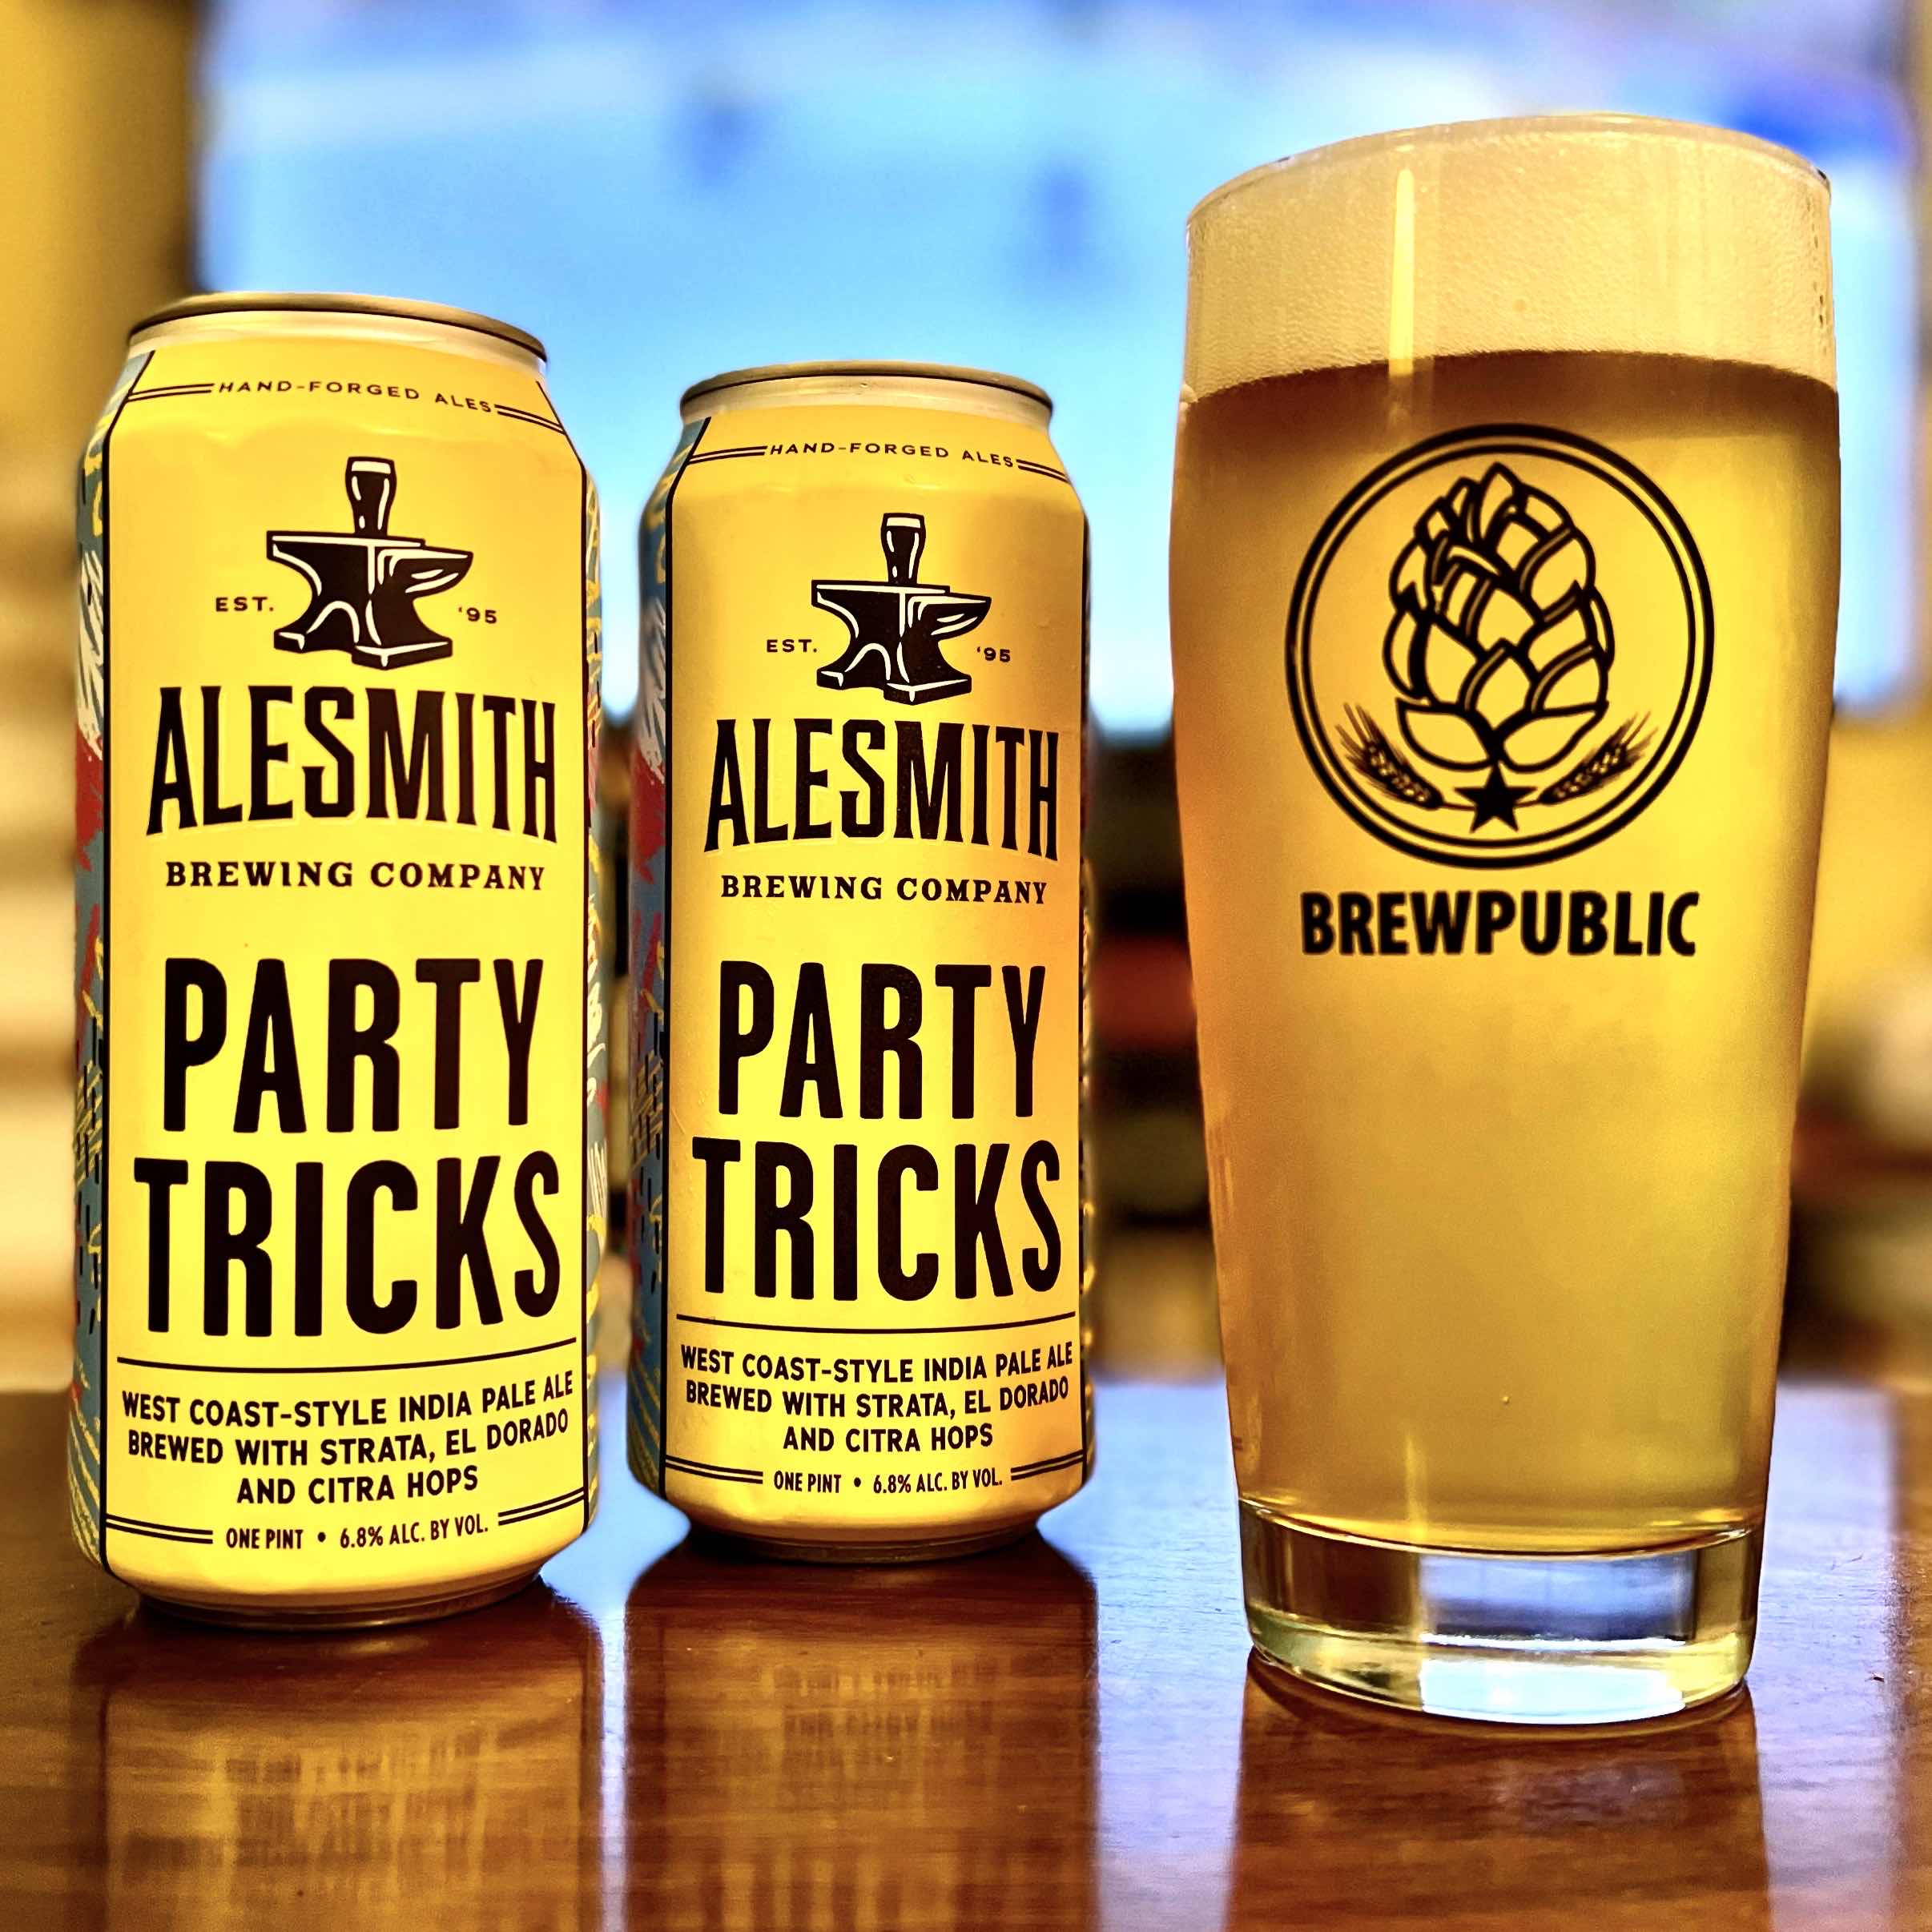 AleSmith Brewing releases Party Tricks West Coast IPA to kick off the New Year!